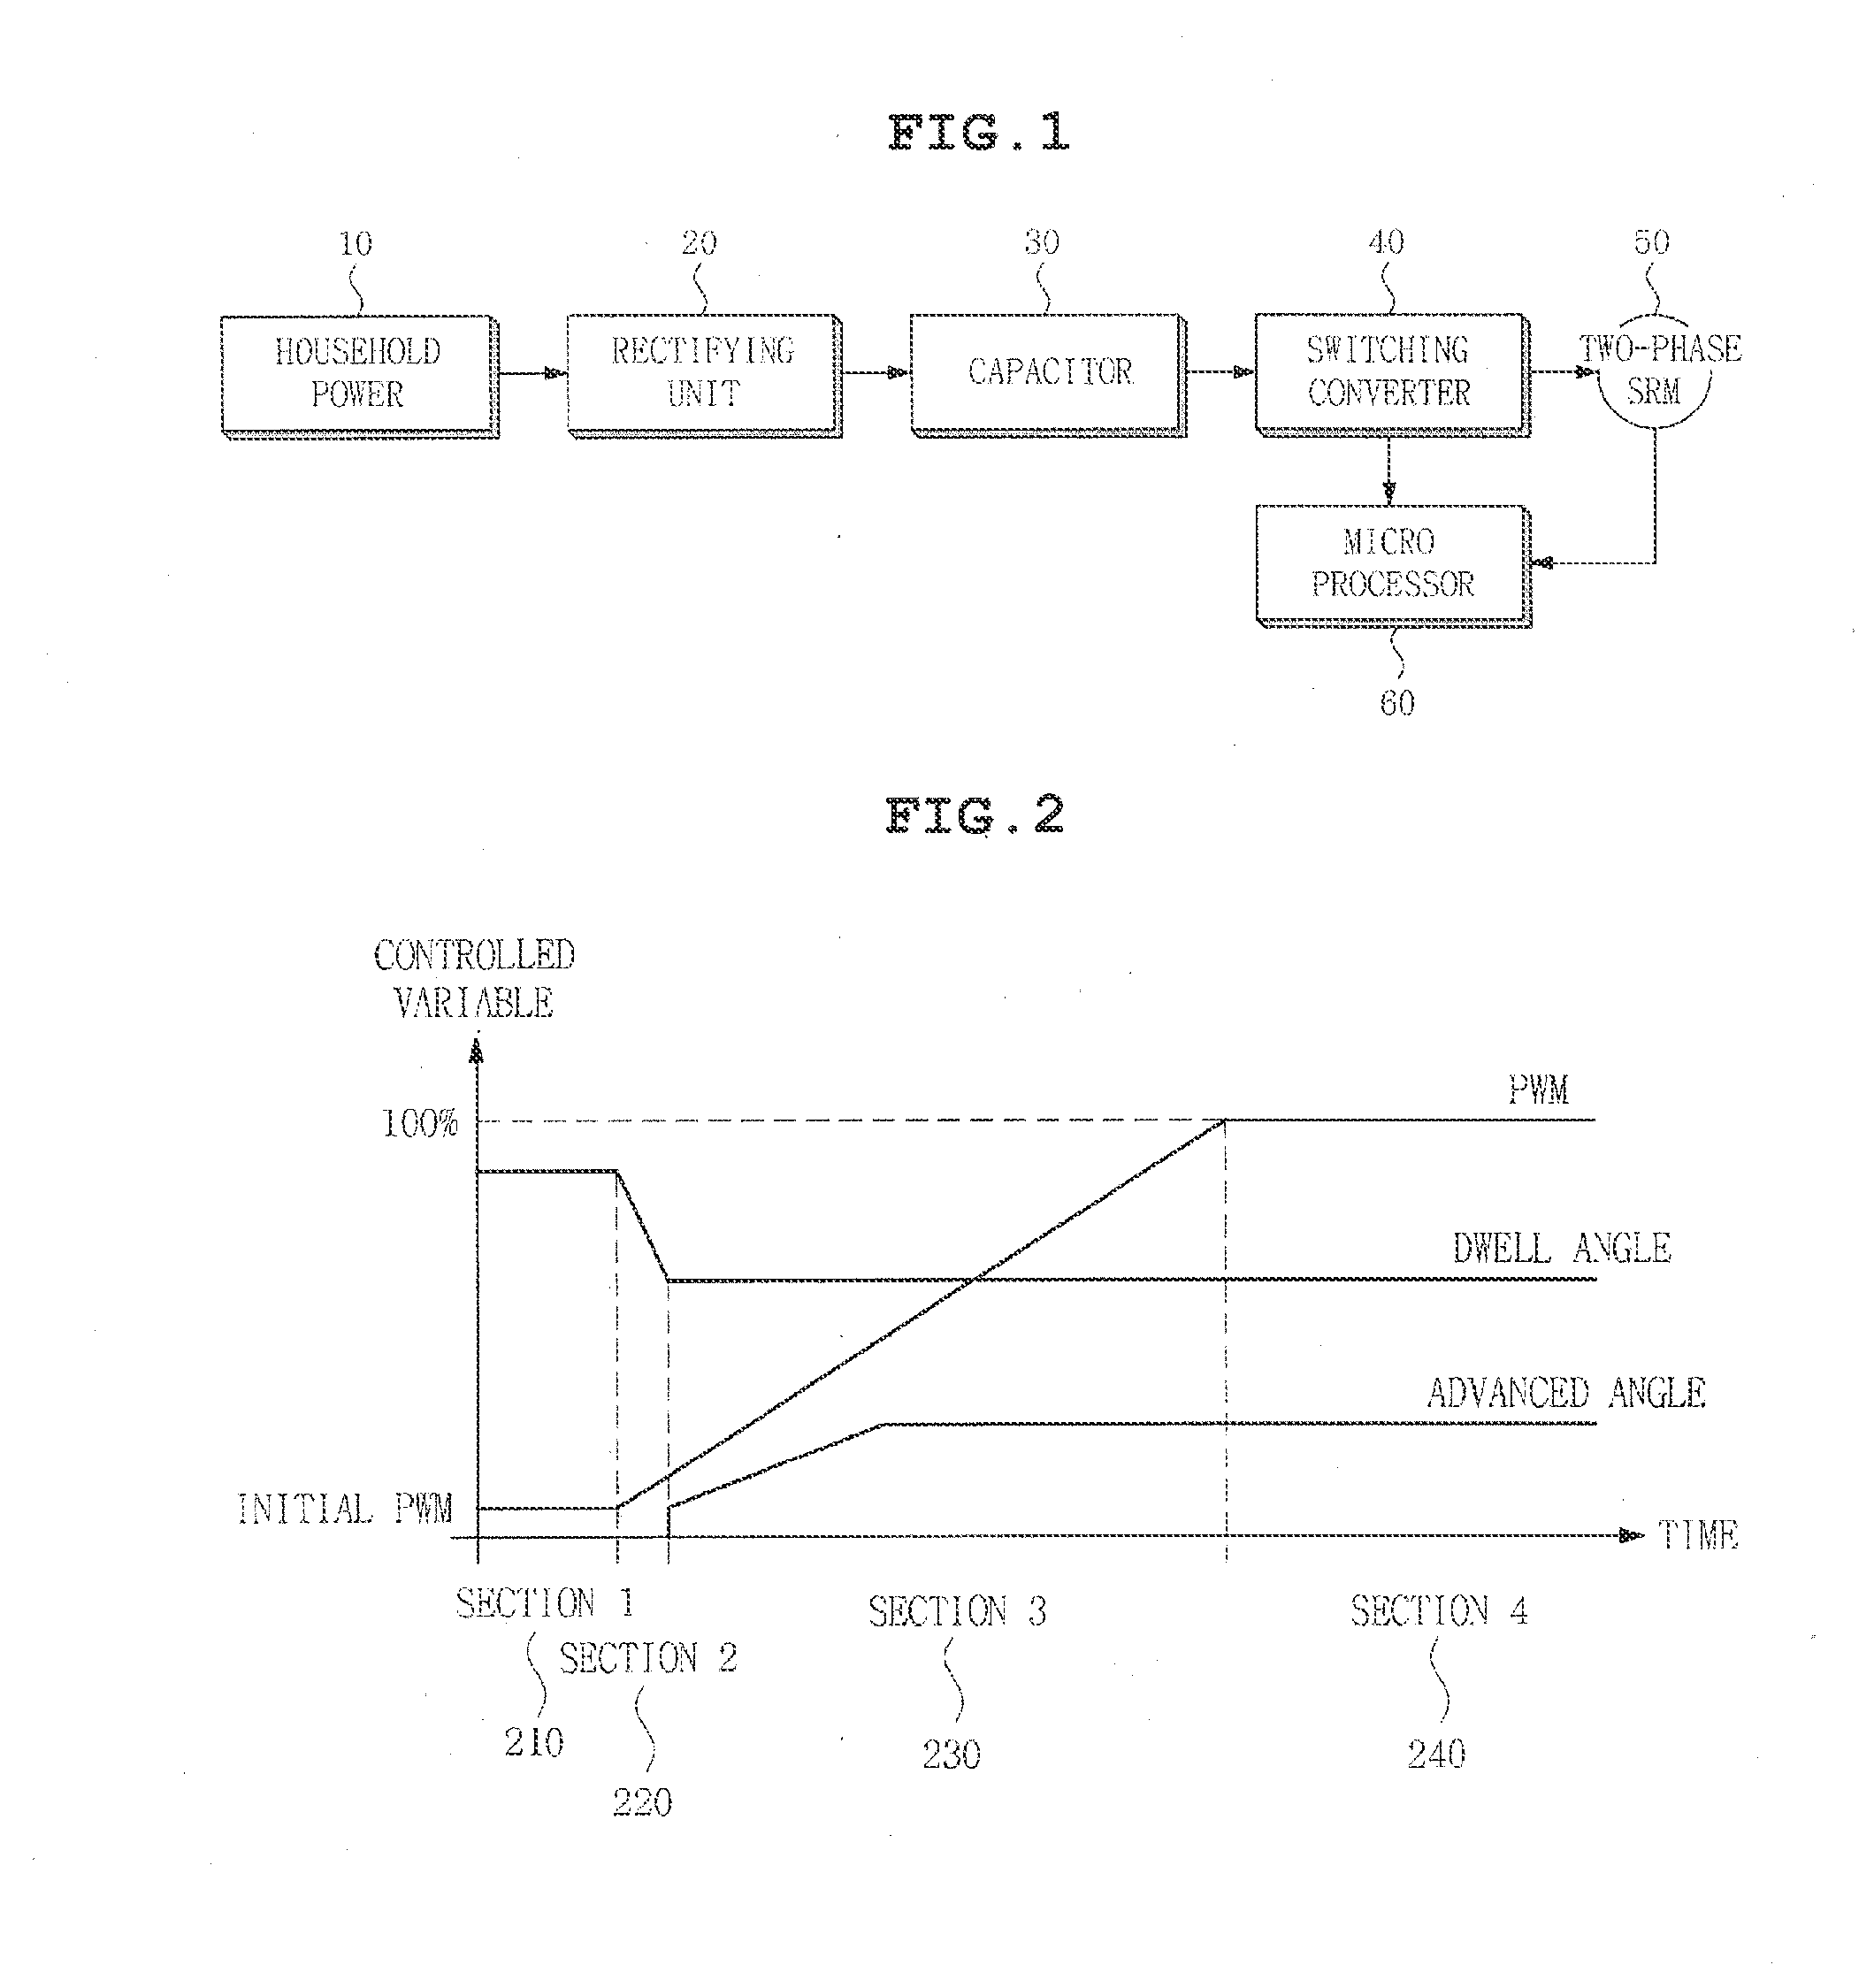 Motor acceleration apparatus and method